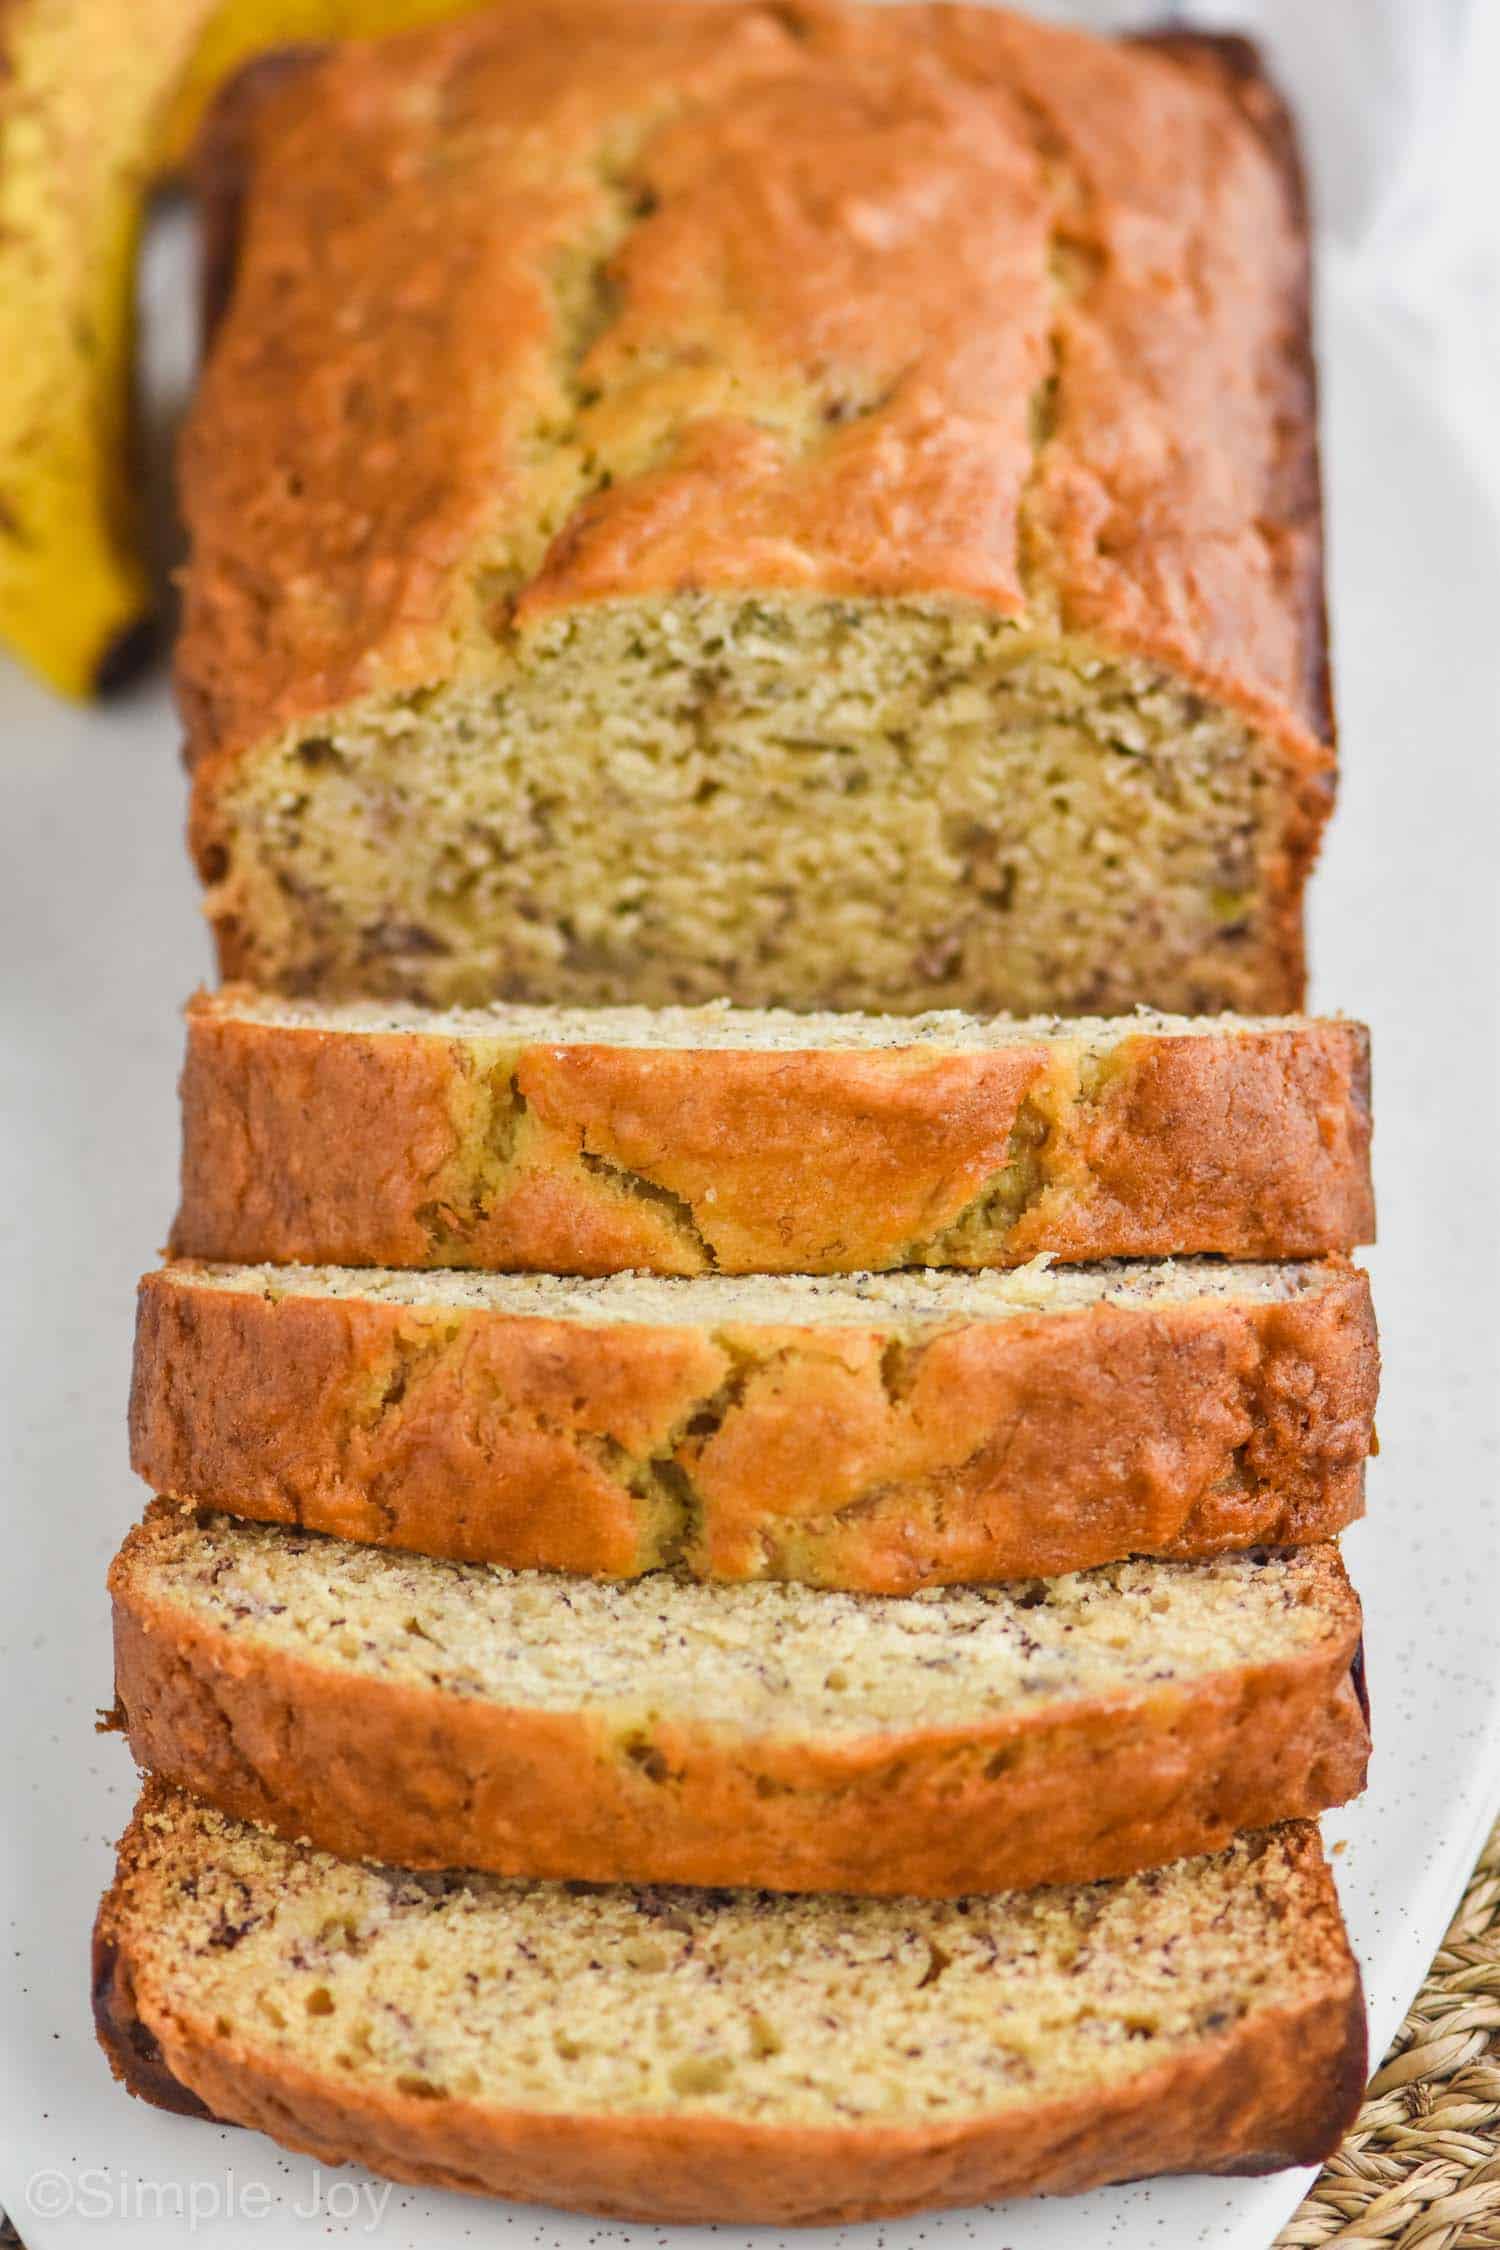 Banana Bread Recipes: 20 Different Varieties From Chocolate Chip To Pumpkin